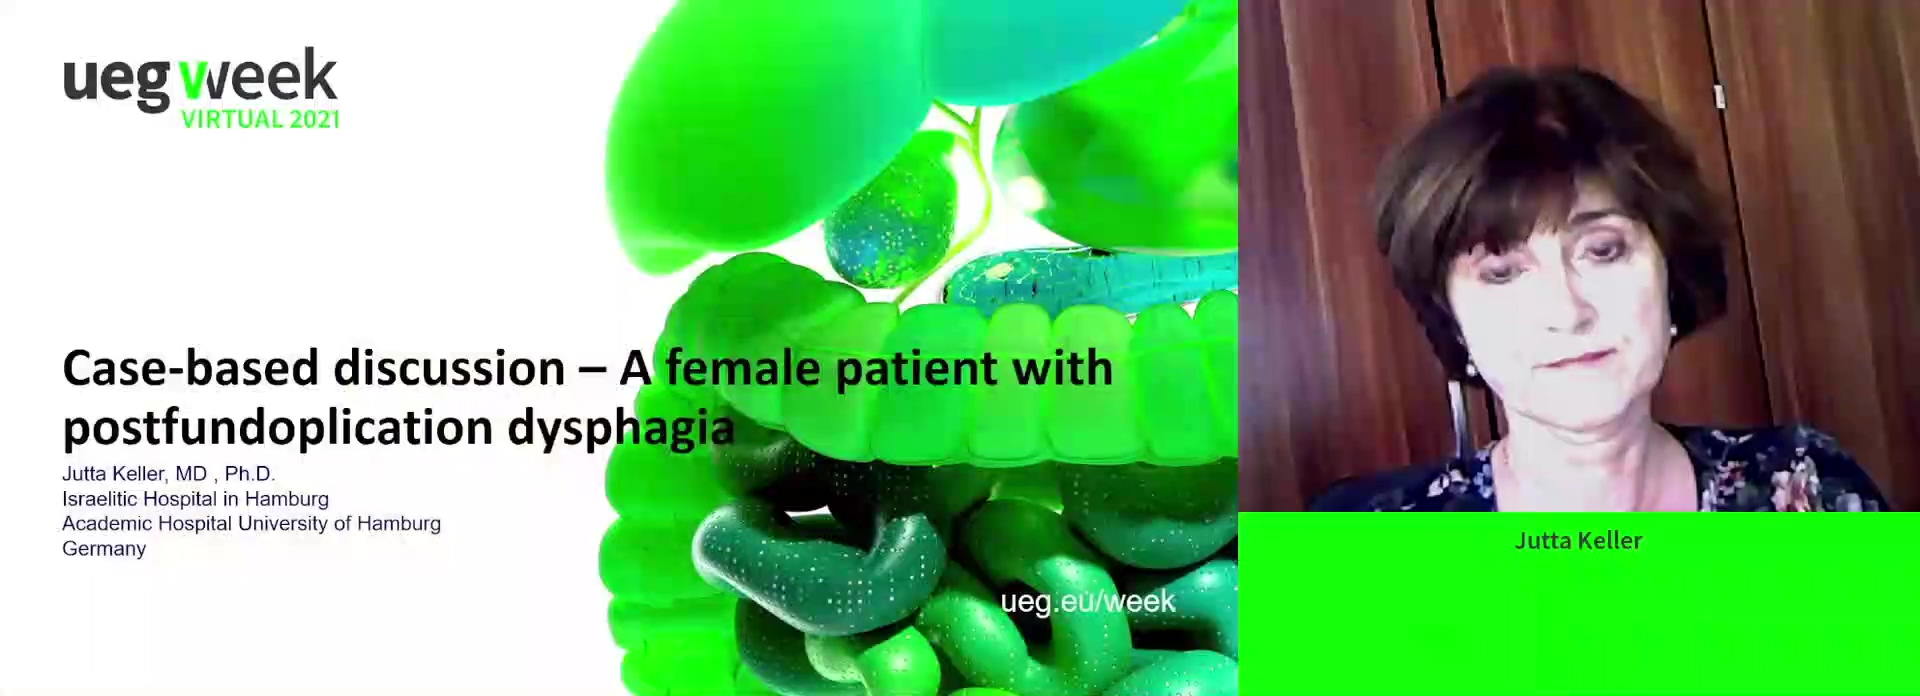 A female patient with post-fundoplication dysphagia